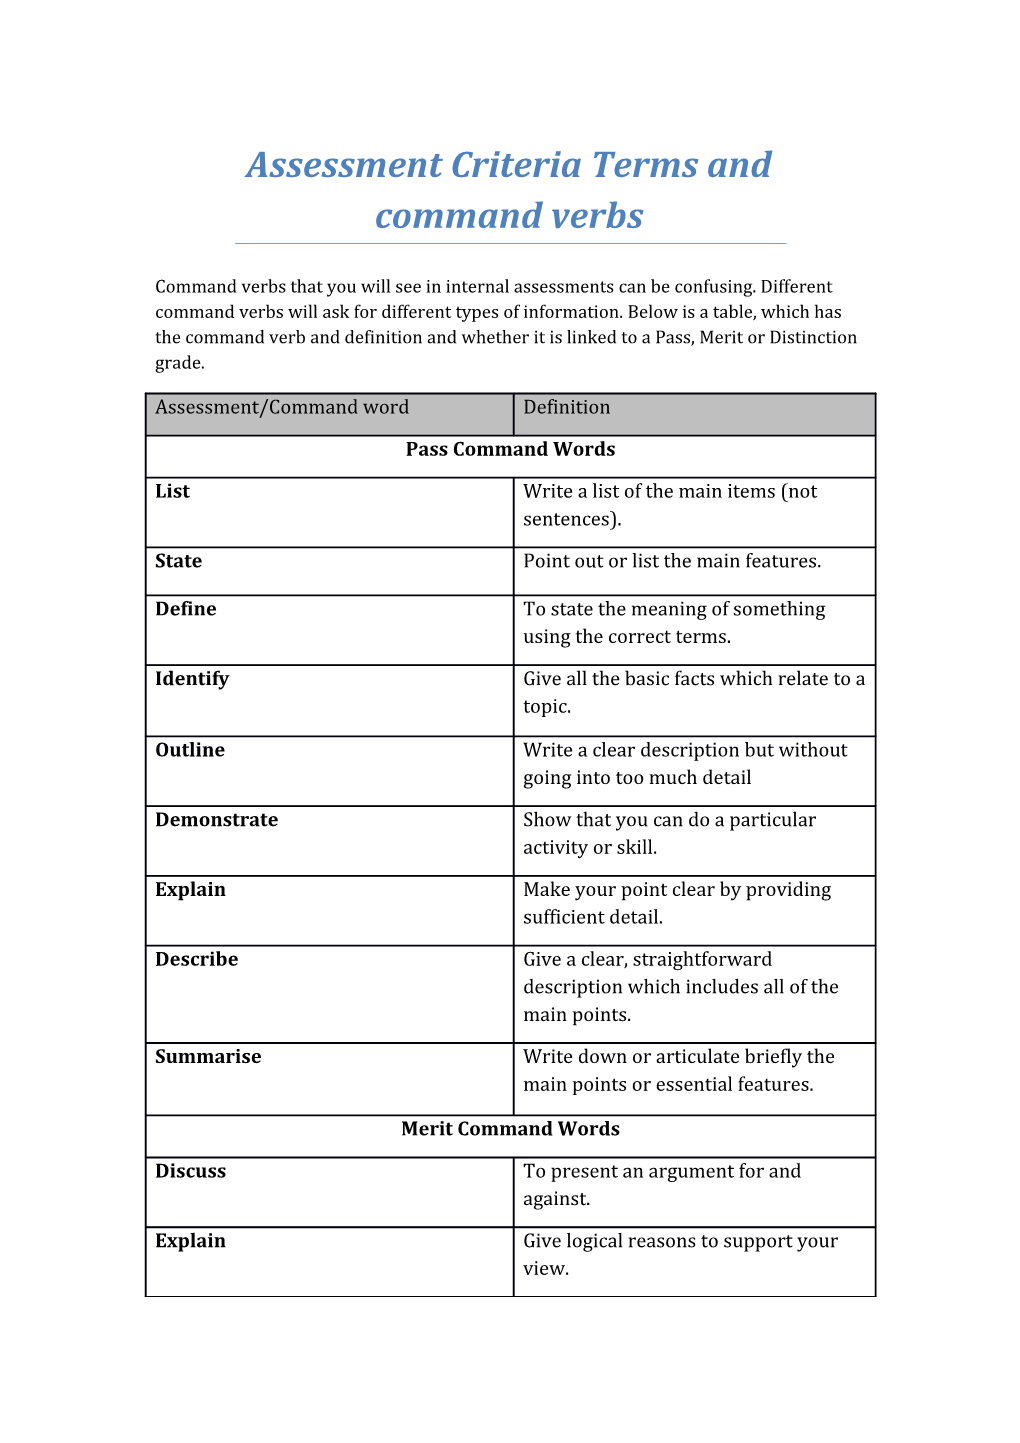 Assessment Criteria Terms and Command Verbs